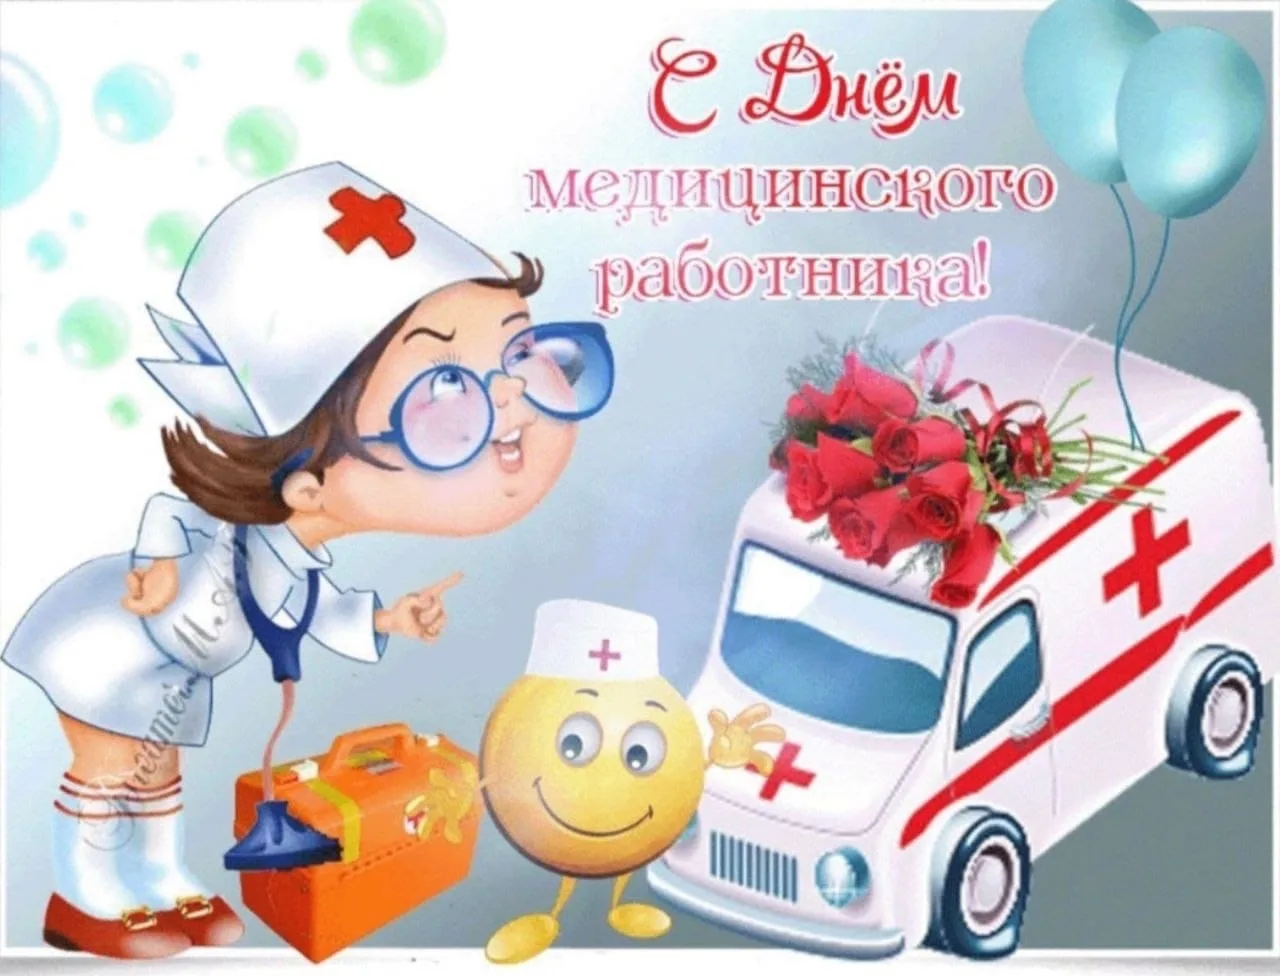 Фото Congratulations on Ambulance Day to colleagues #2